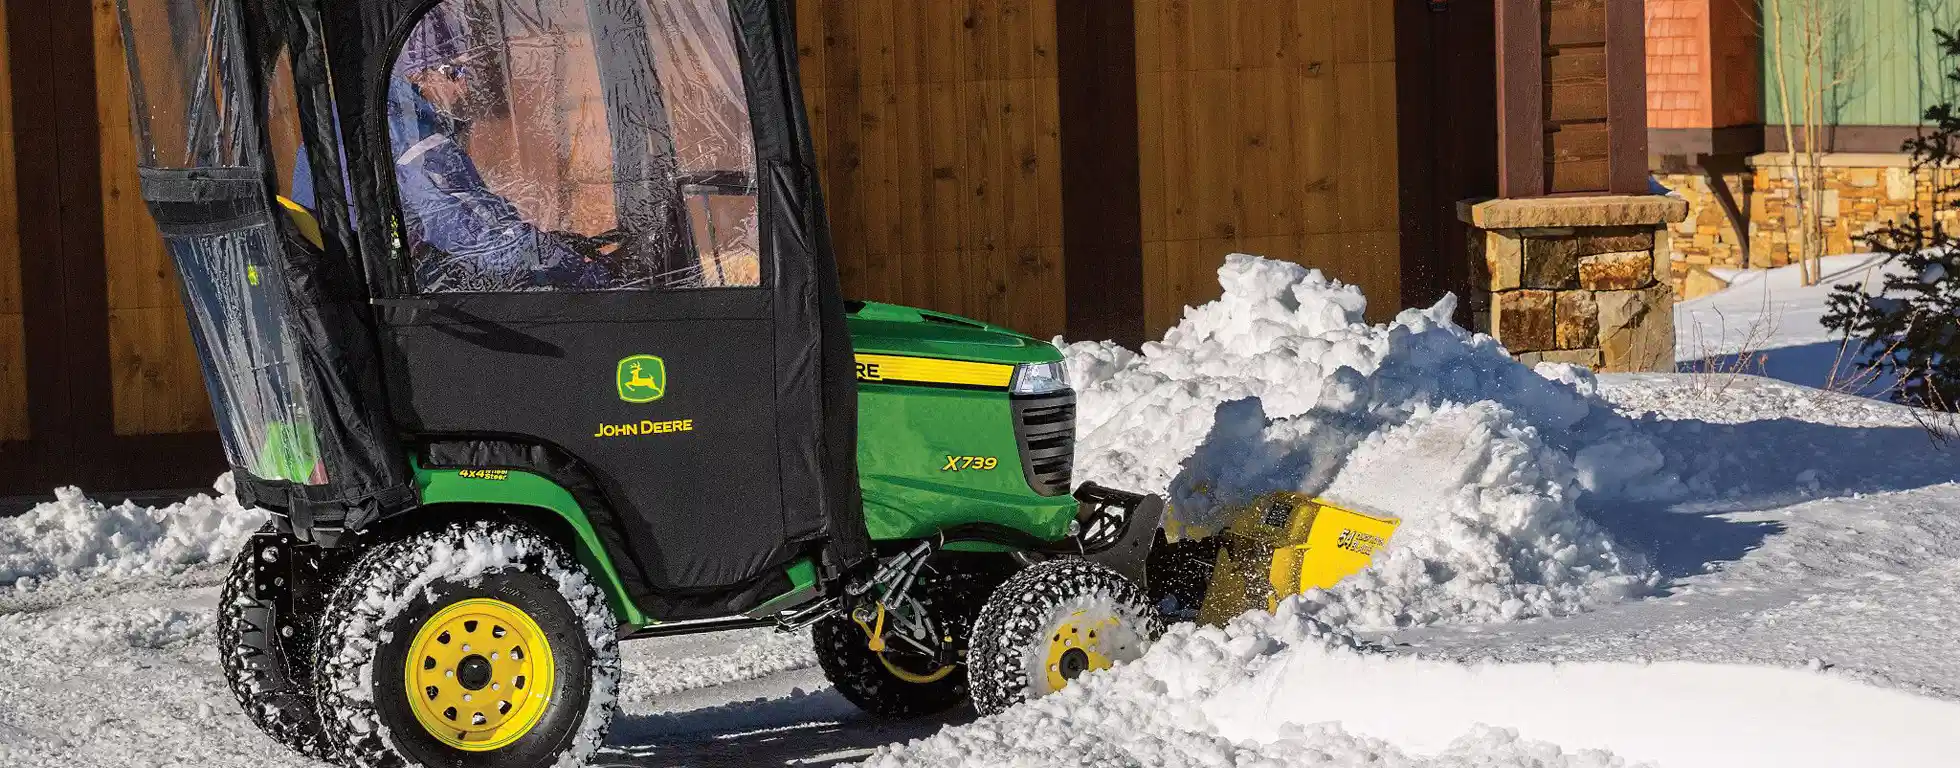 Snow Removal Attachments for John Deere Lawn Mowers